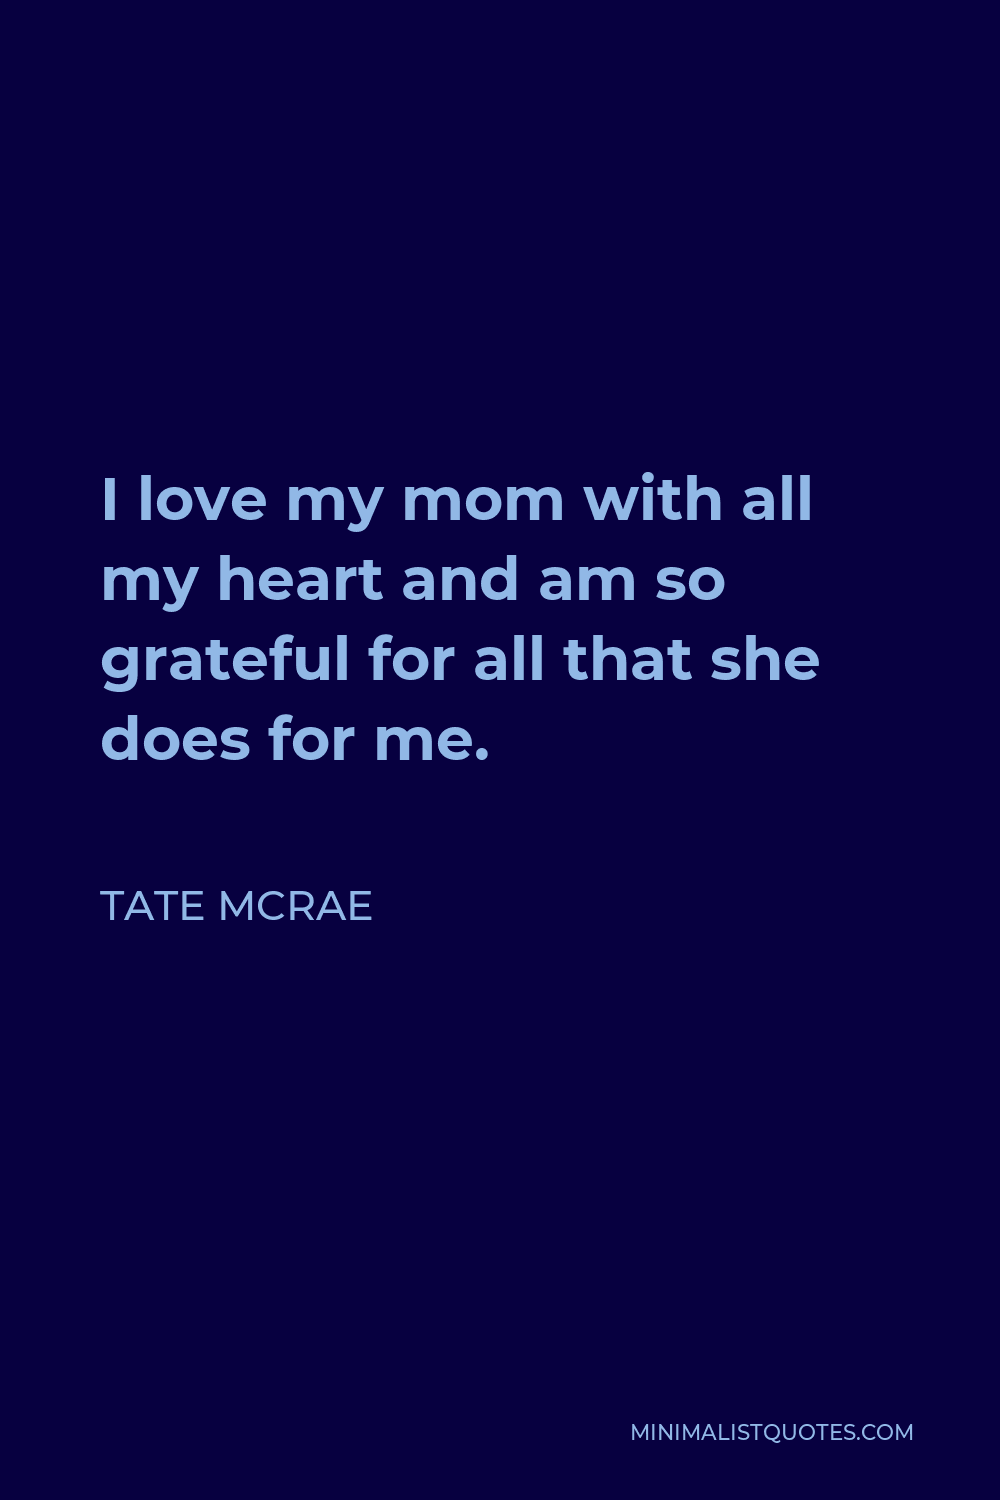 Tate McRae Quote - I love my mom with all my heart and am so grateful for all that she does for me.